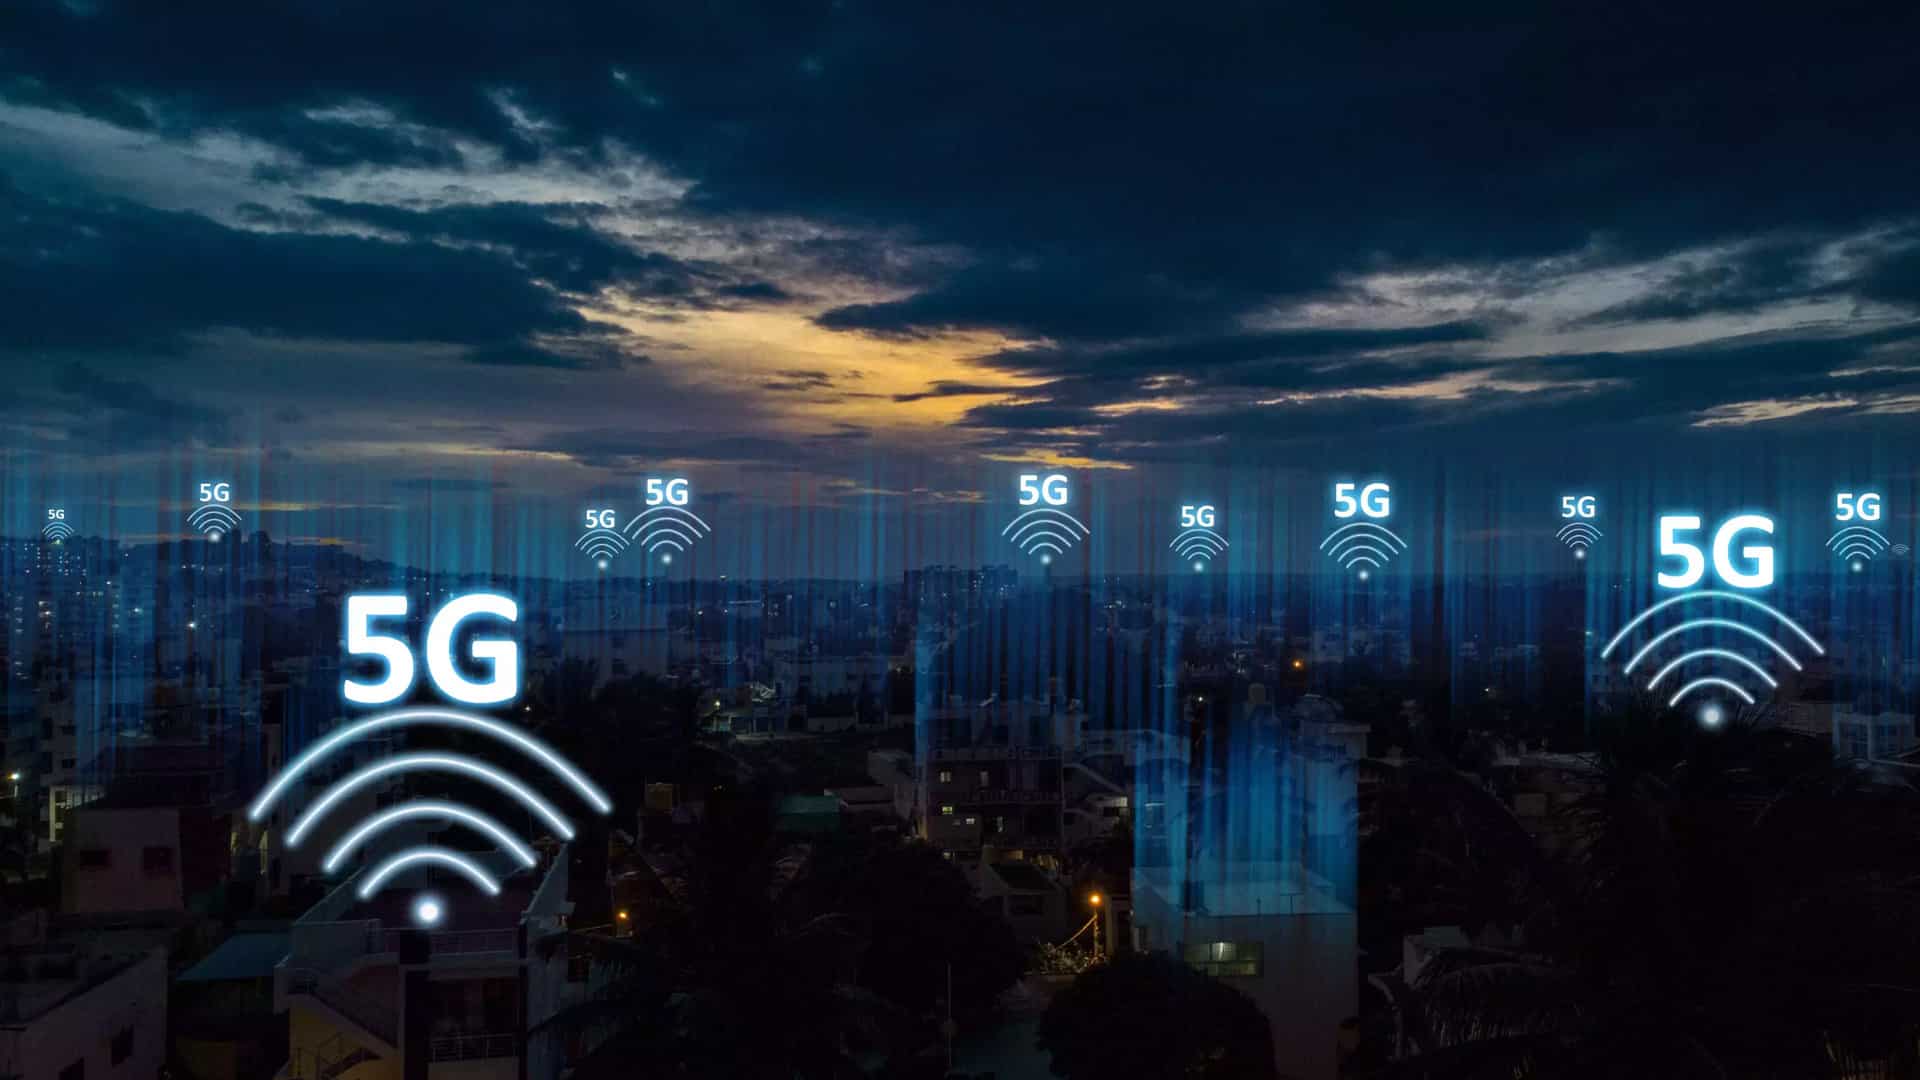 Delicensing 6 Ghz band to hamper 5G, 6G roll out in India, incur loss to exchequer: COAI